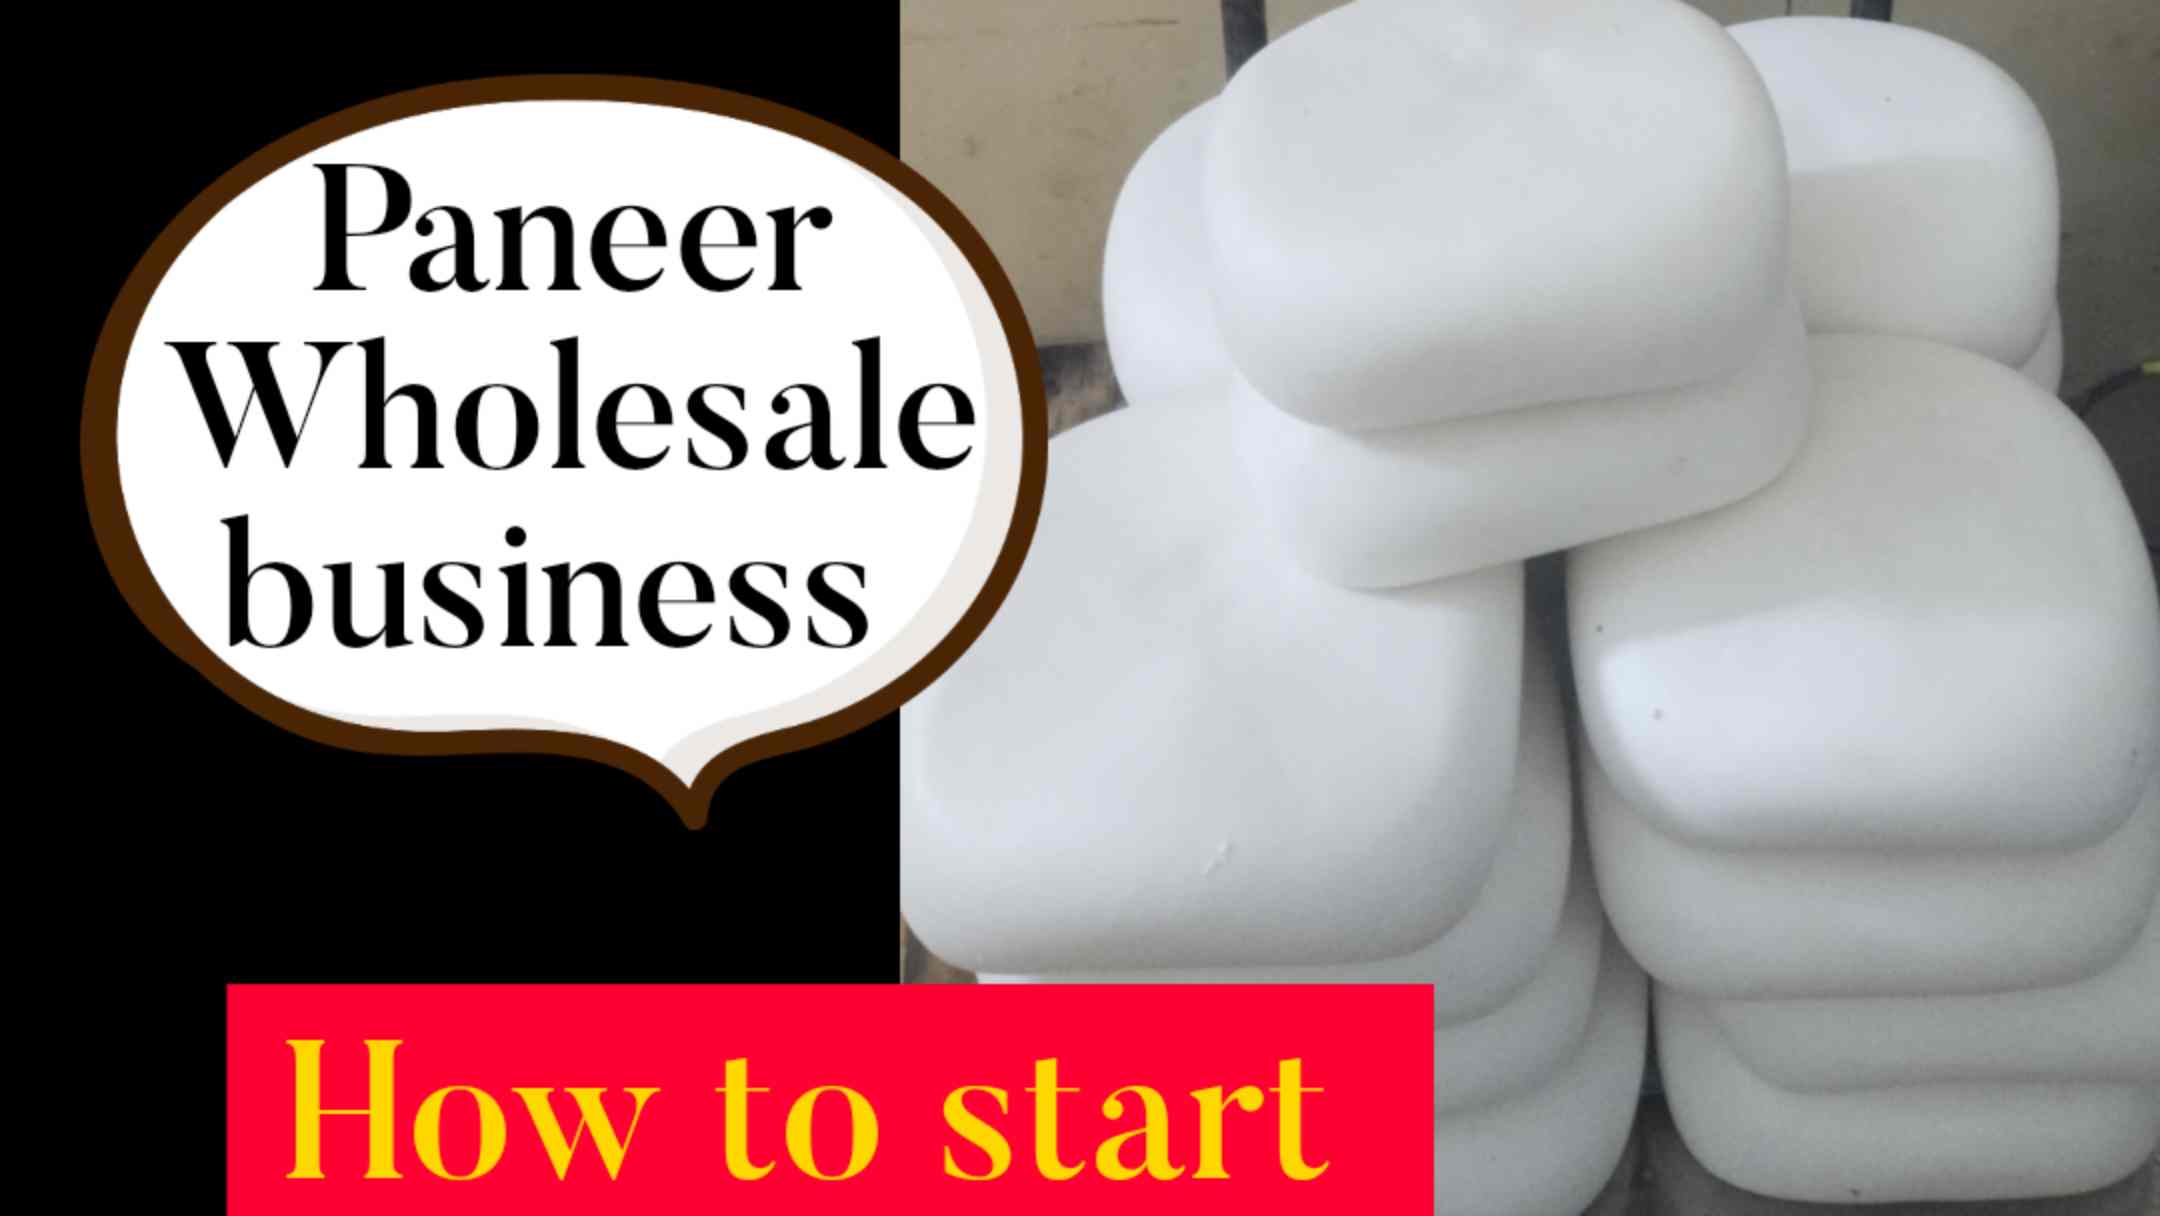 Paneer Wholesale Business Earning ₹ 1.50 lakh per month from /